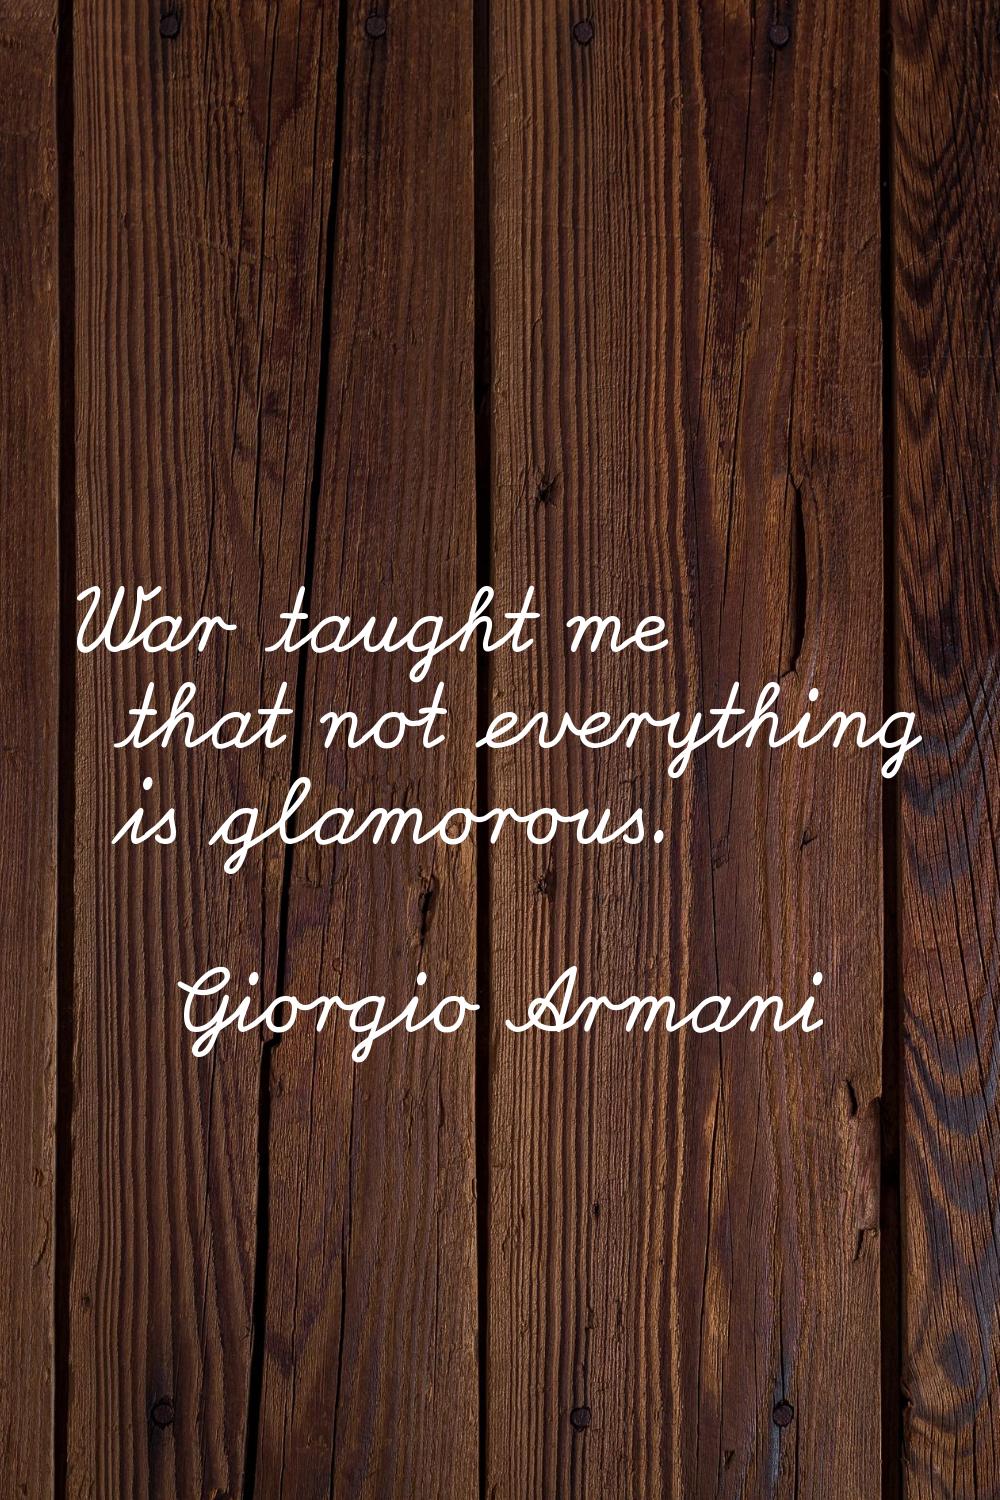 War taught me that not everything is glamorous.